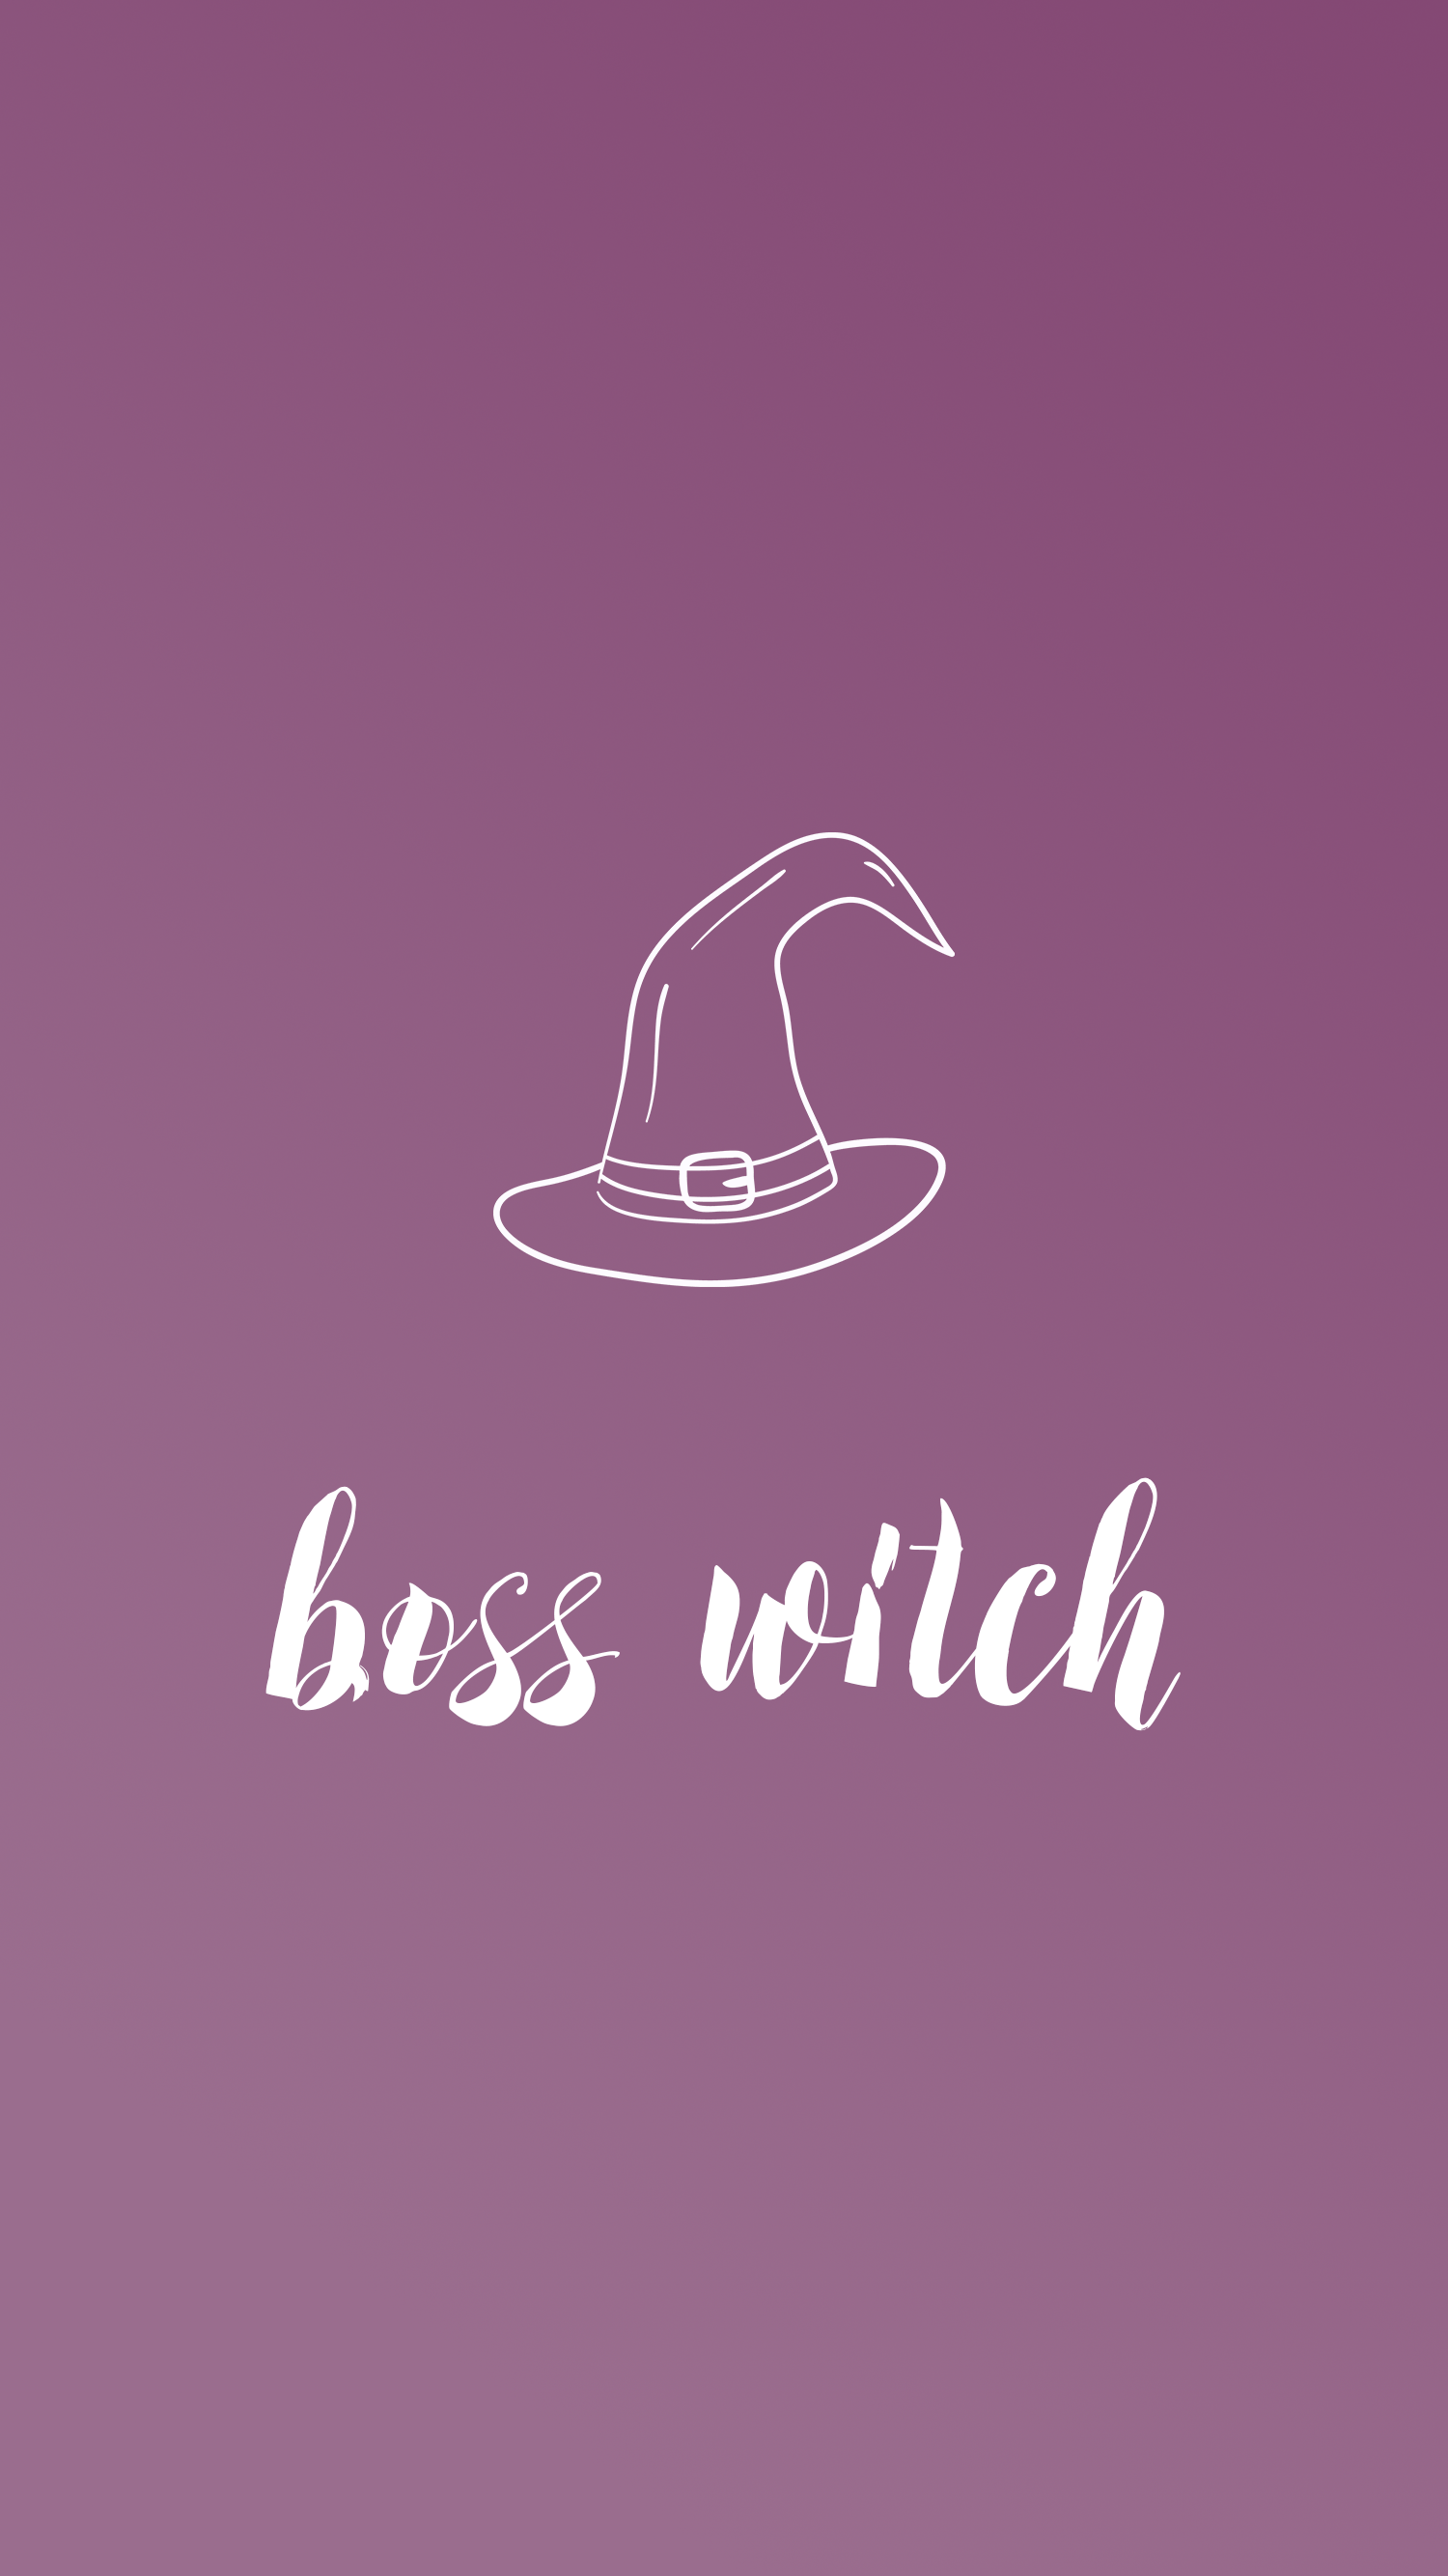 Boss Witch wallpaper for your phone or desktop. - Witch